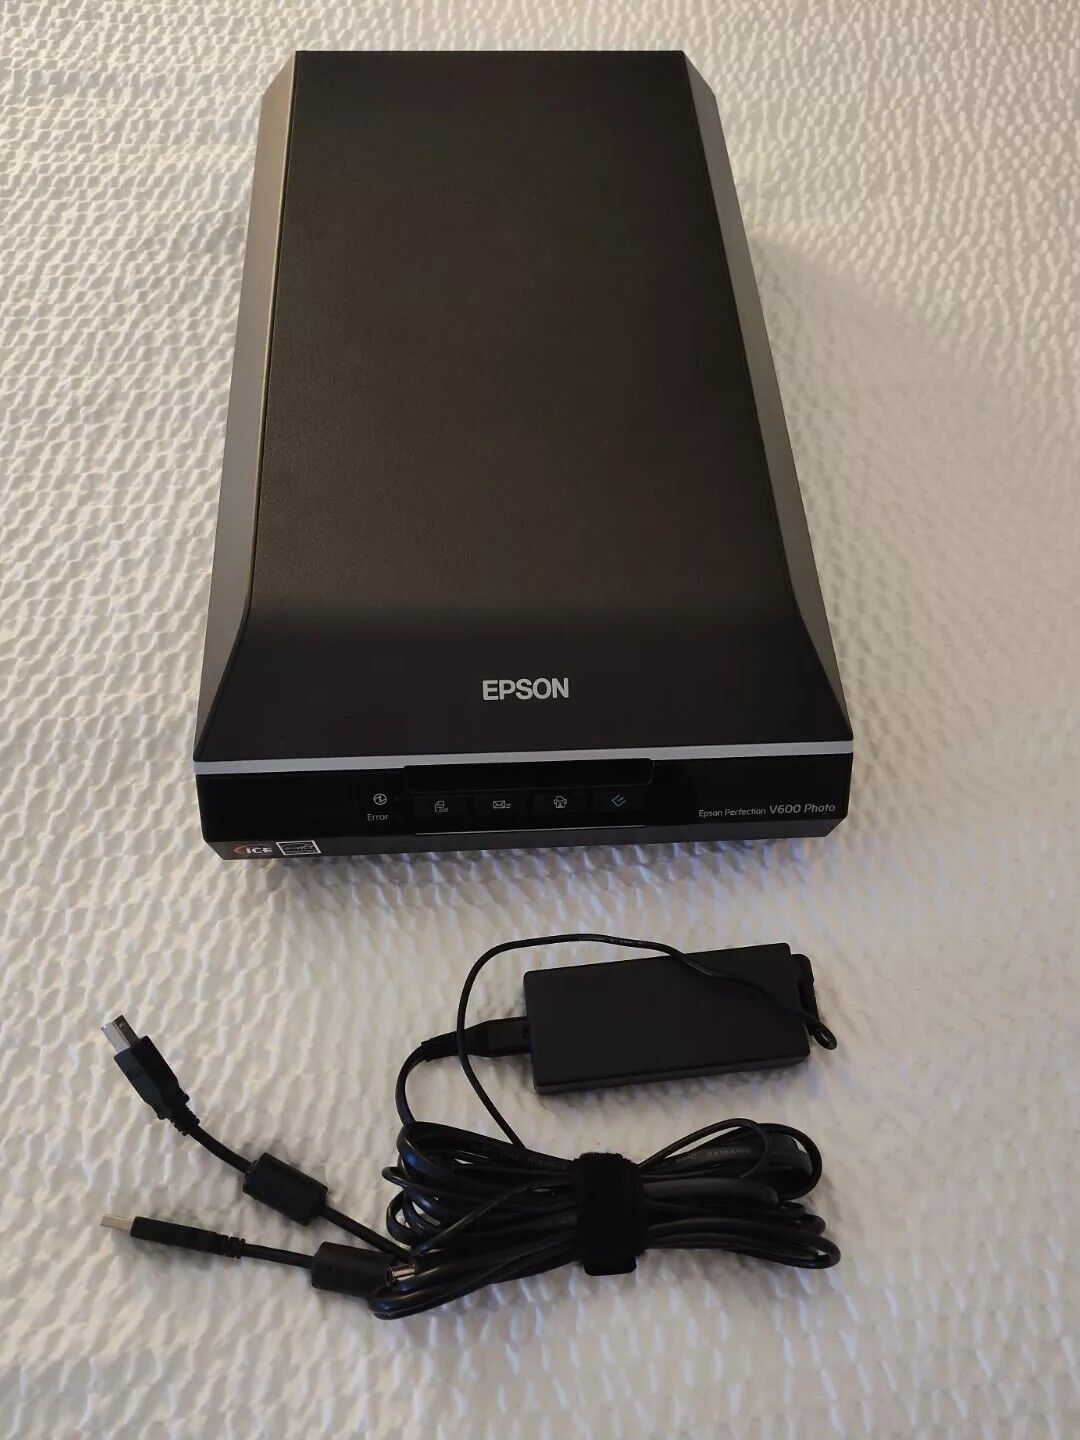 Epson Perfection V600 Photo Scanner w/Cords power & USB EUC Tested